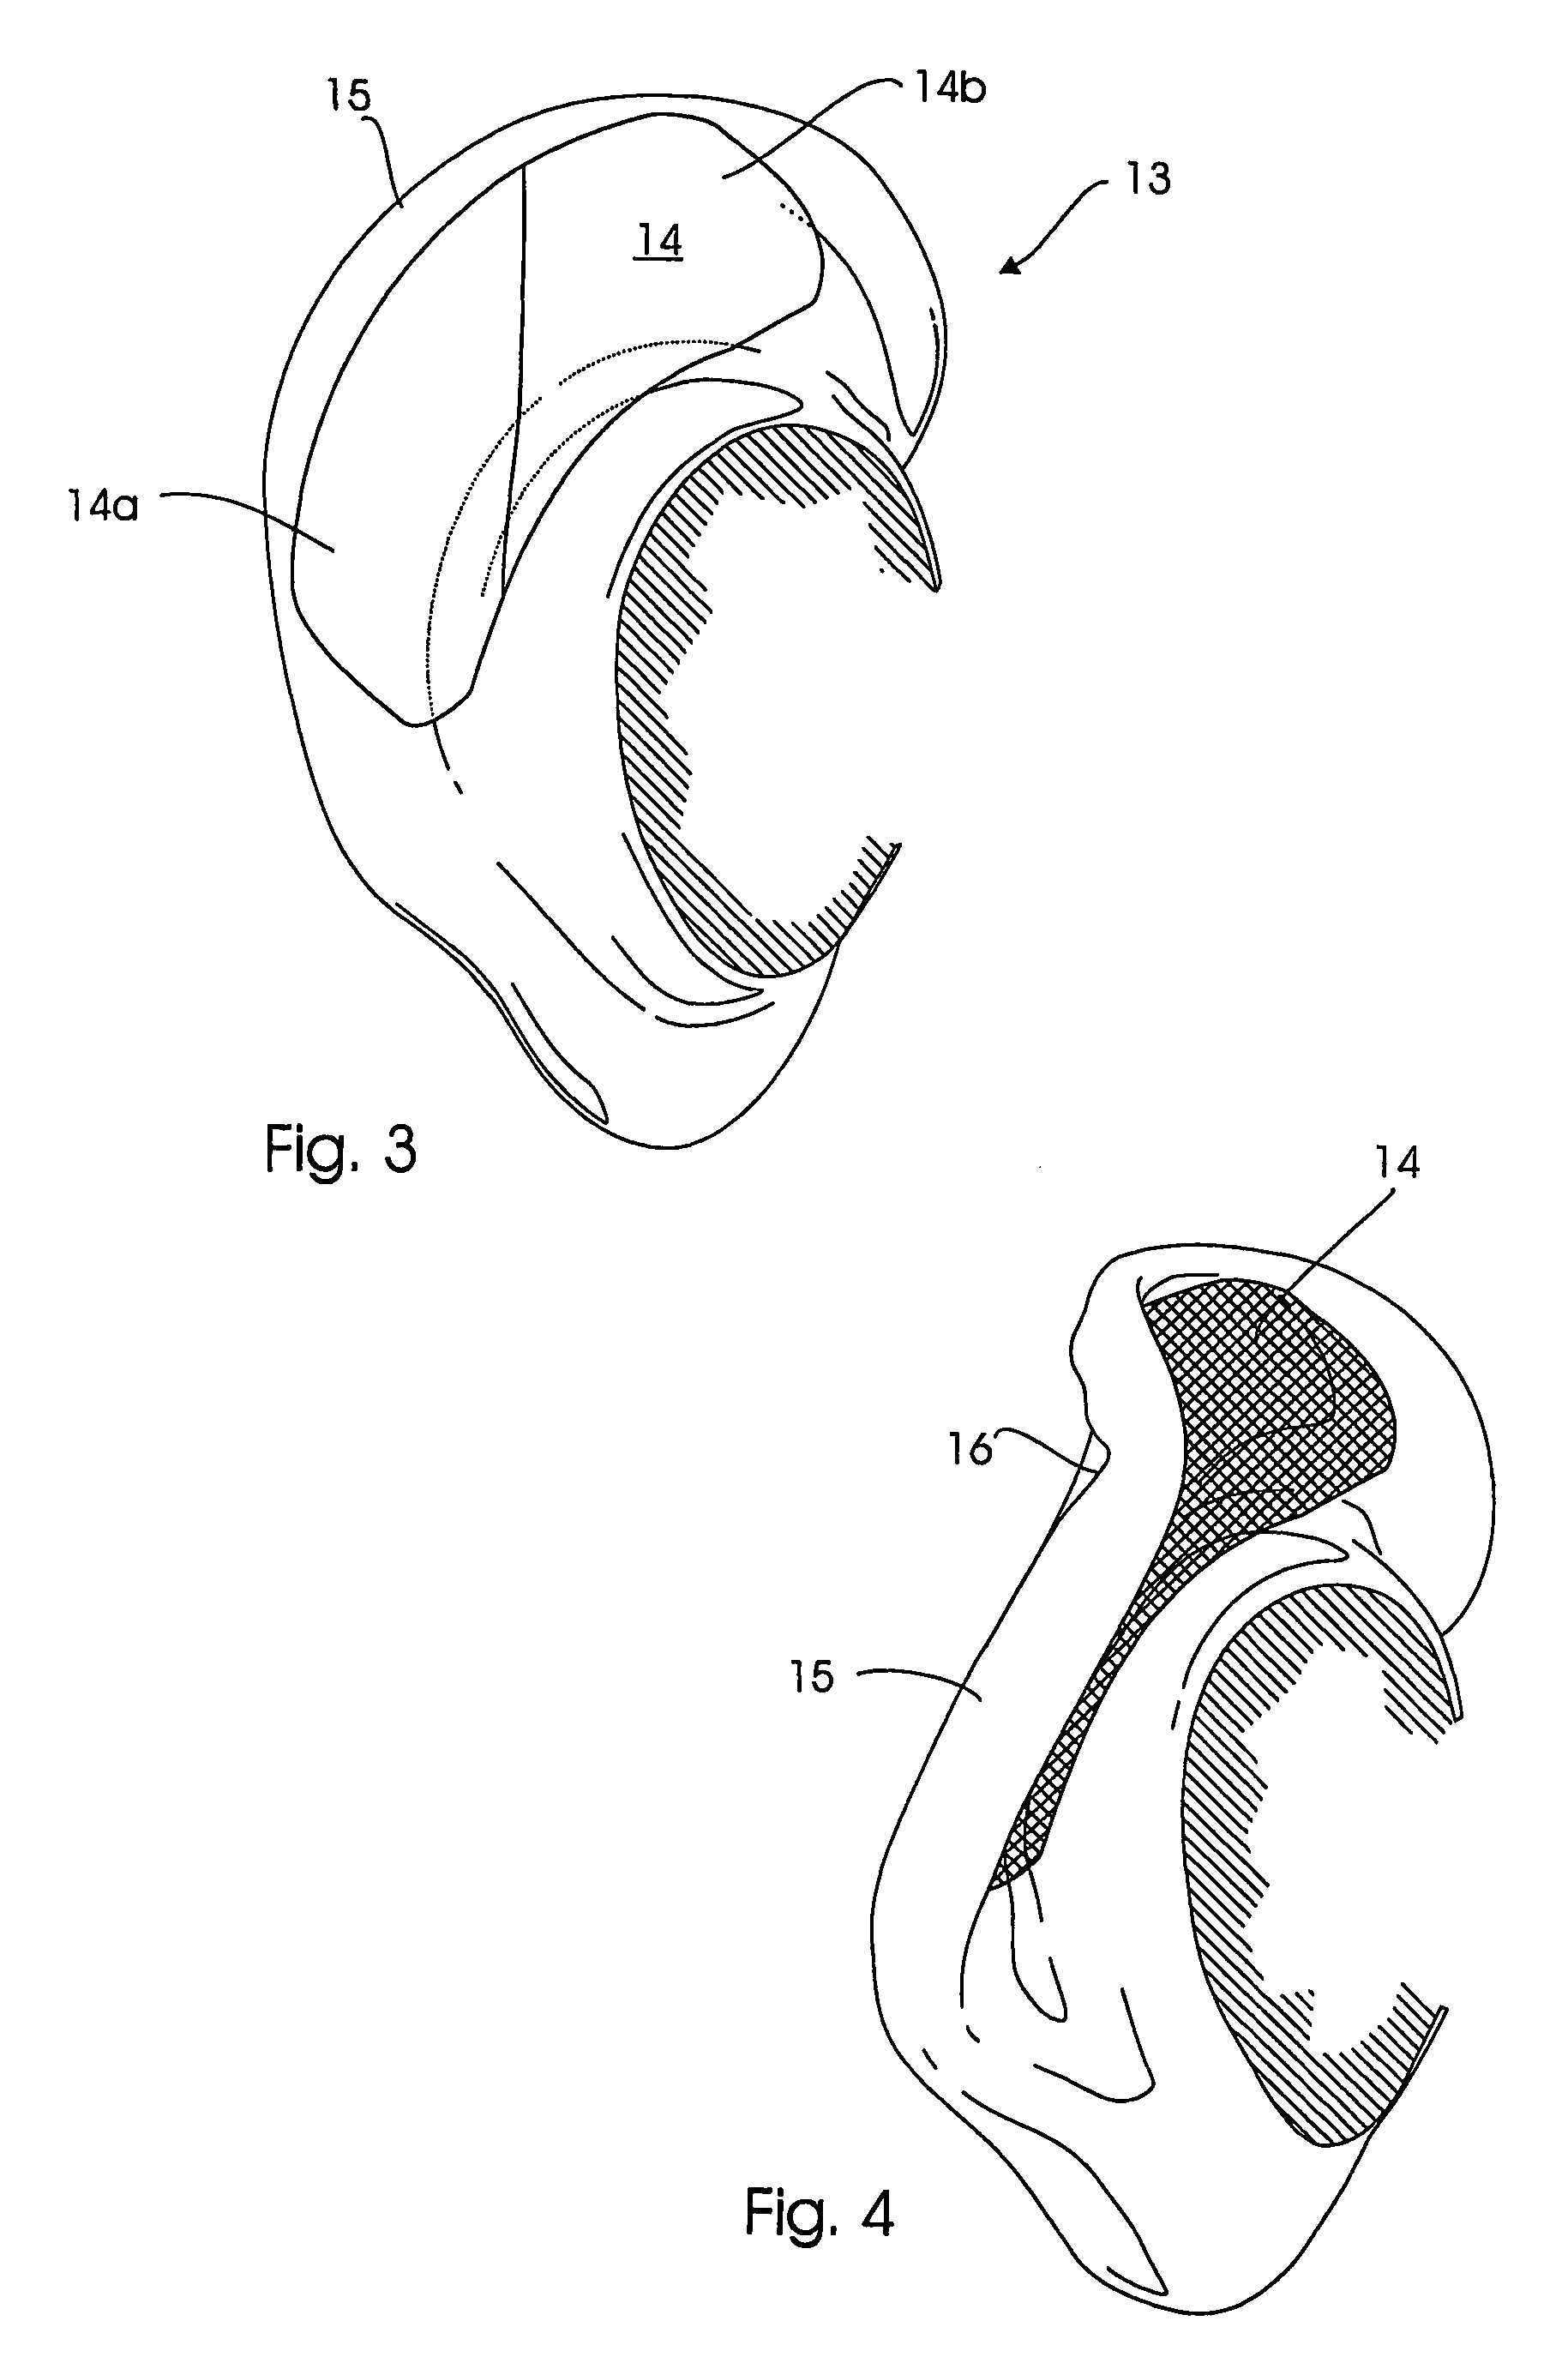 Clamp for correcting the external ear and method of using the clamp